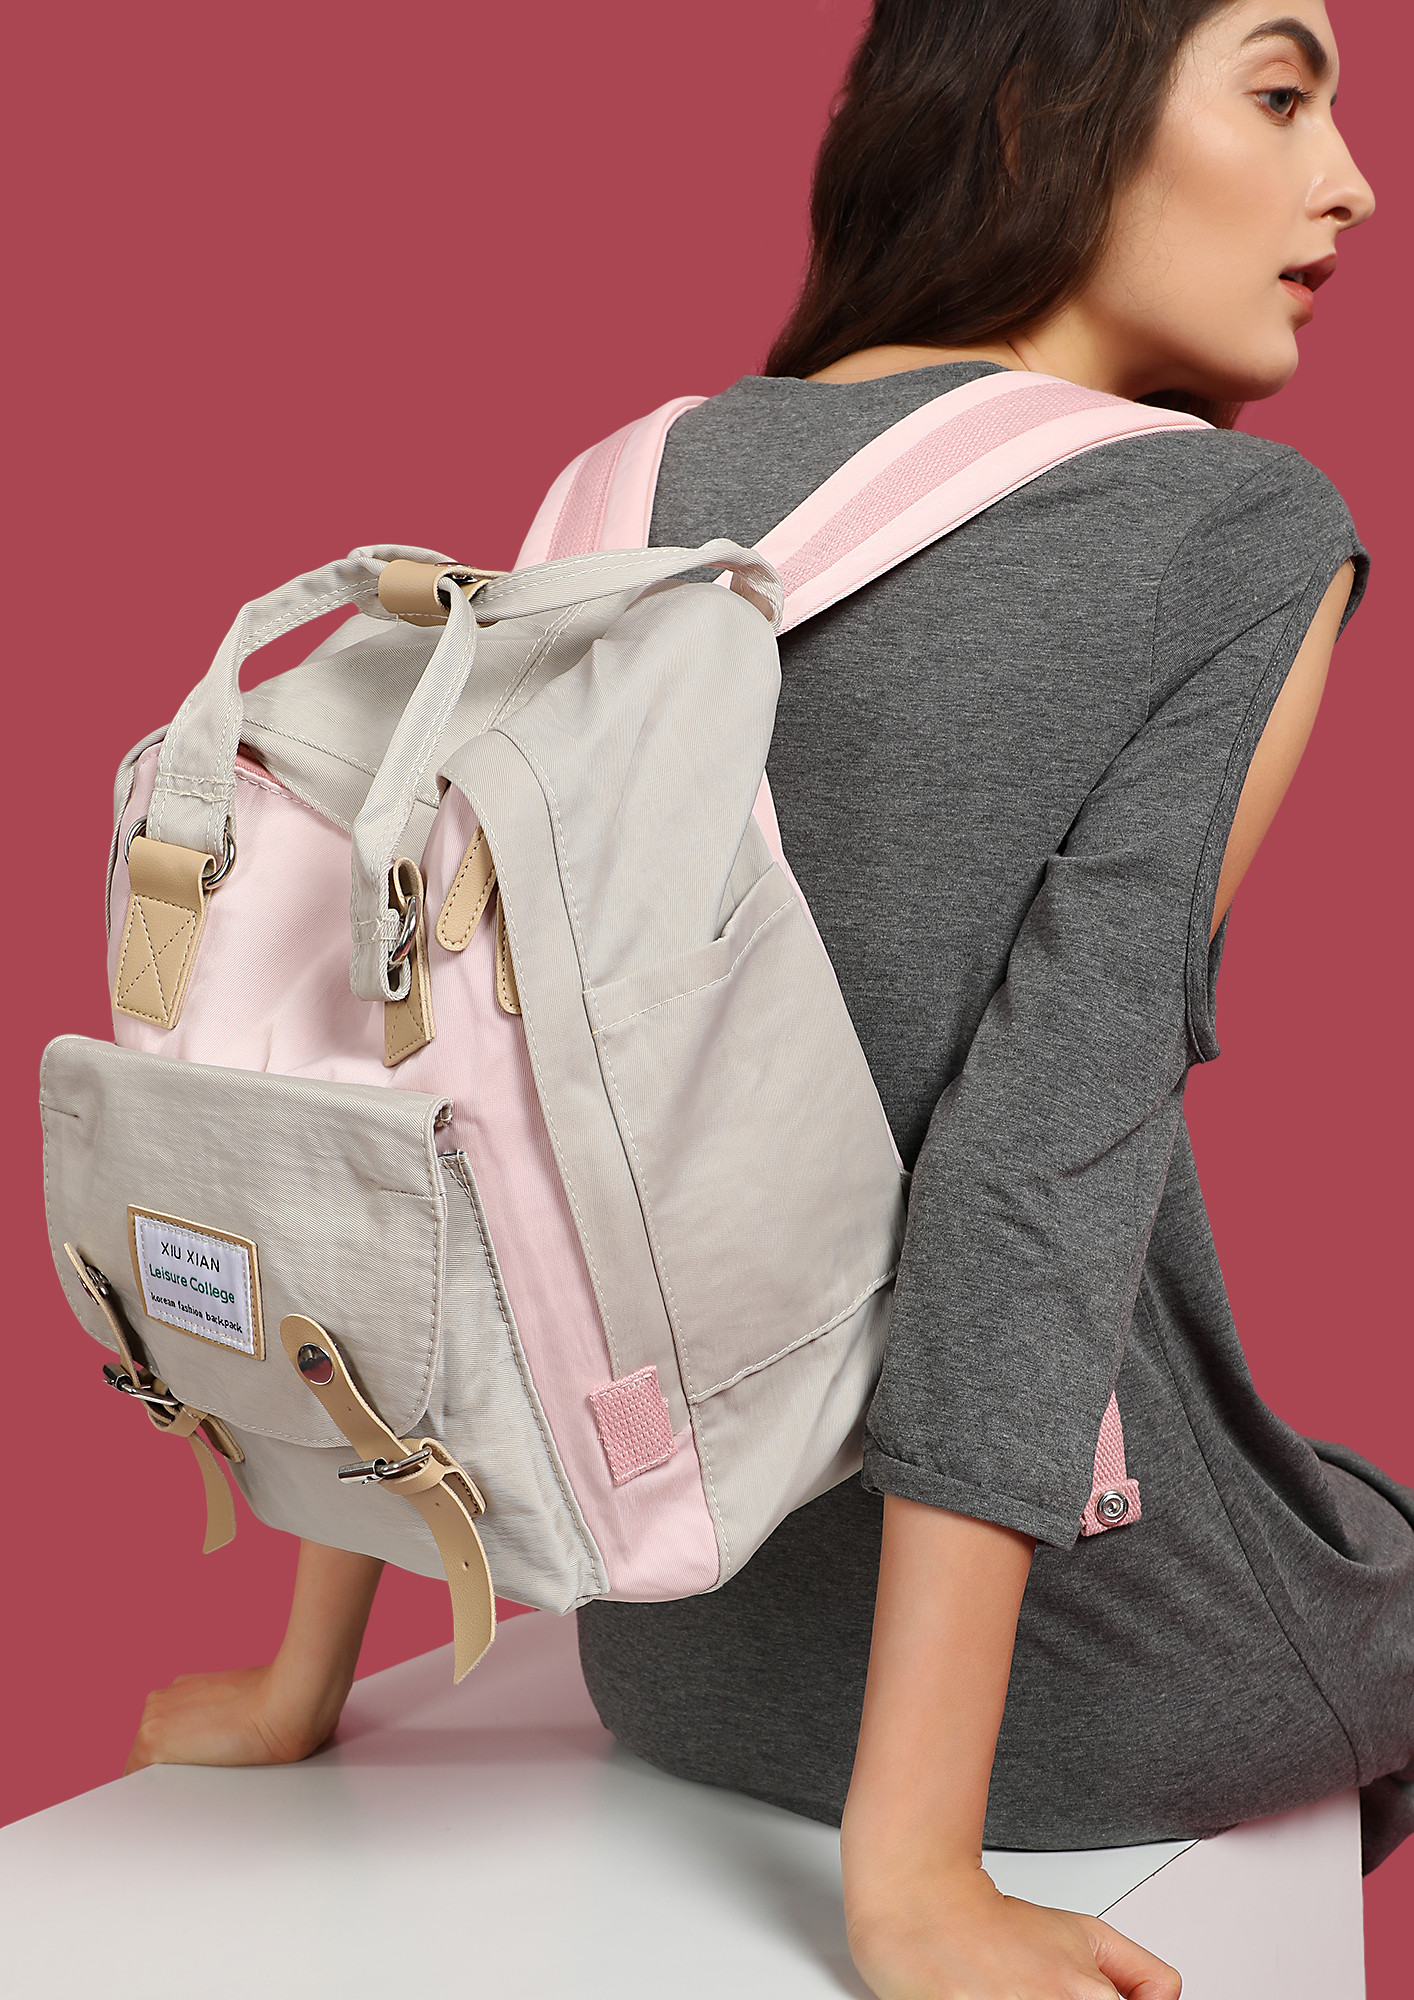 BACK TO '90S PINK BACKPACK